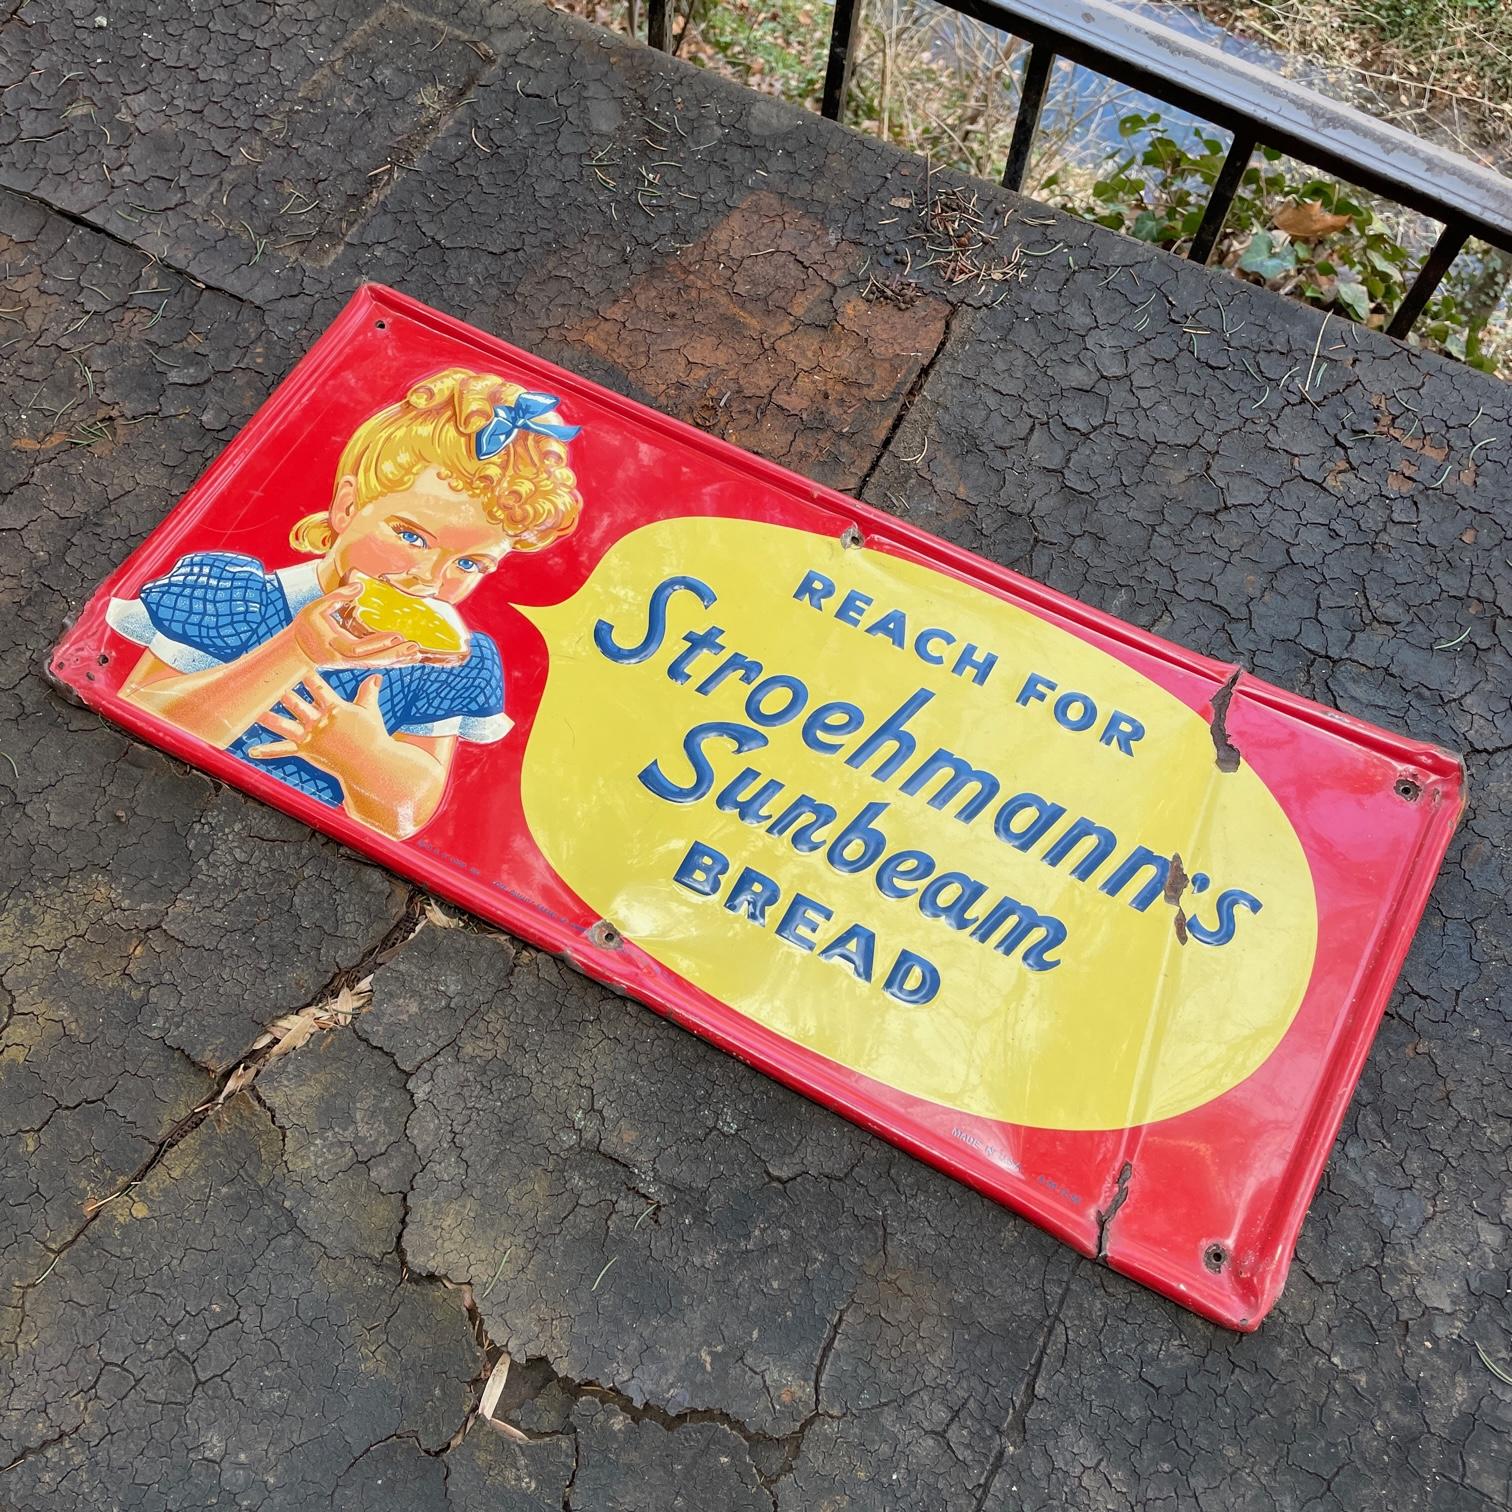 A very rare advertising campaign tin tacker sign. 'Reach for Stroehmann's Sunbeam Bread.' A single sided tin (SST) embossed sign. Marked Q.B.A. Coop Inc. Bank of America -------itive Inc. N.Y.C. Made in USA A-M-12-56. This is an ungraded sign, that